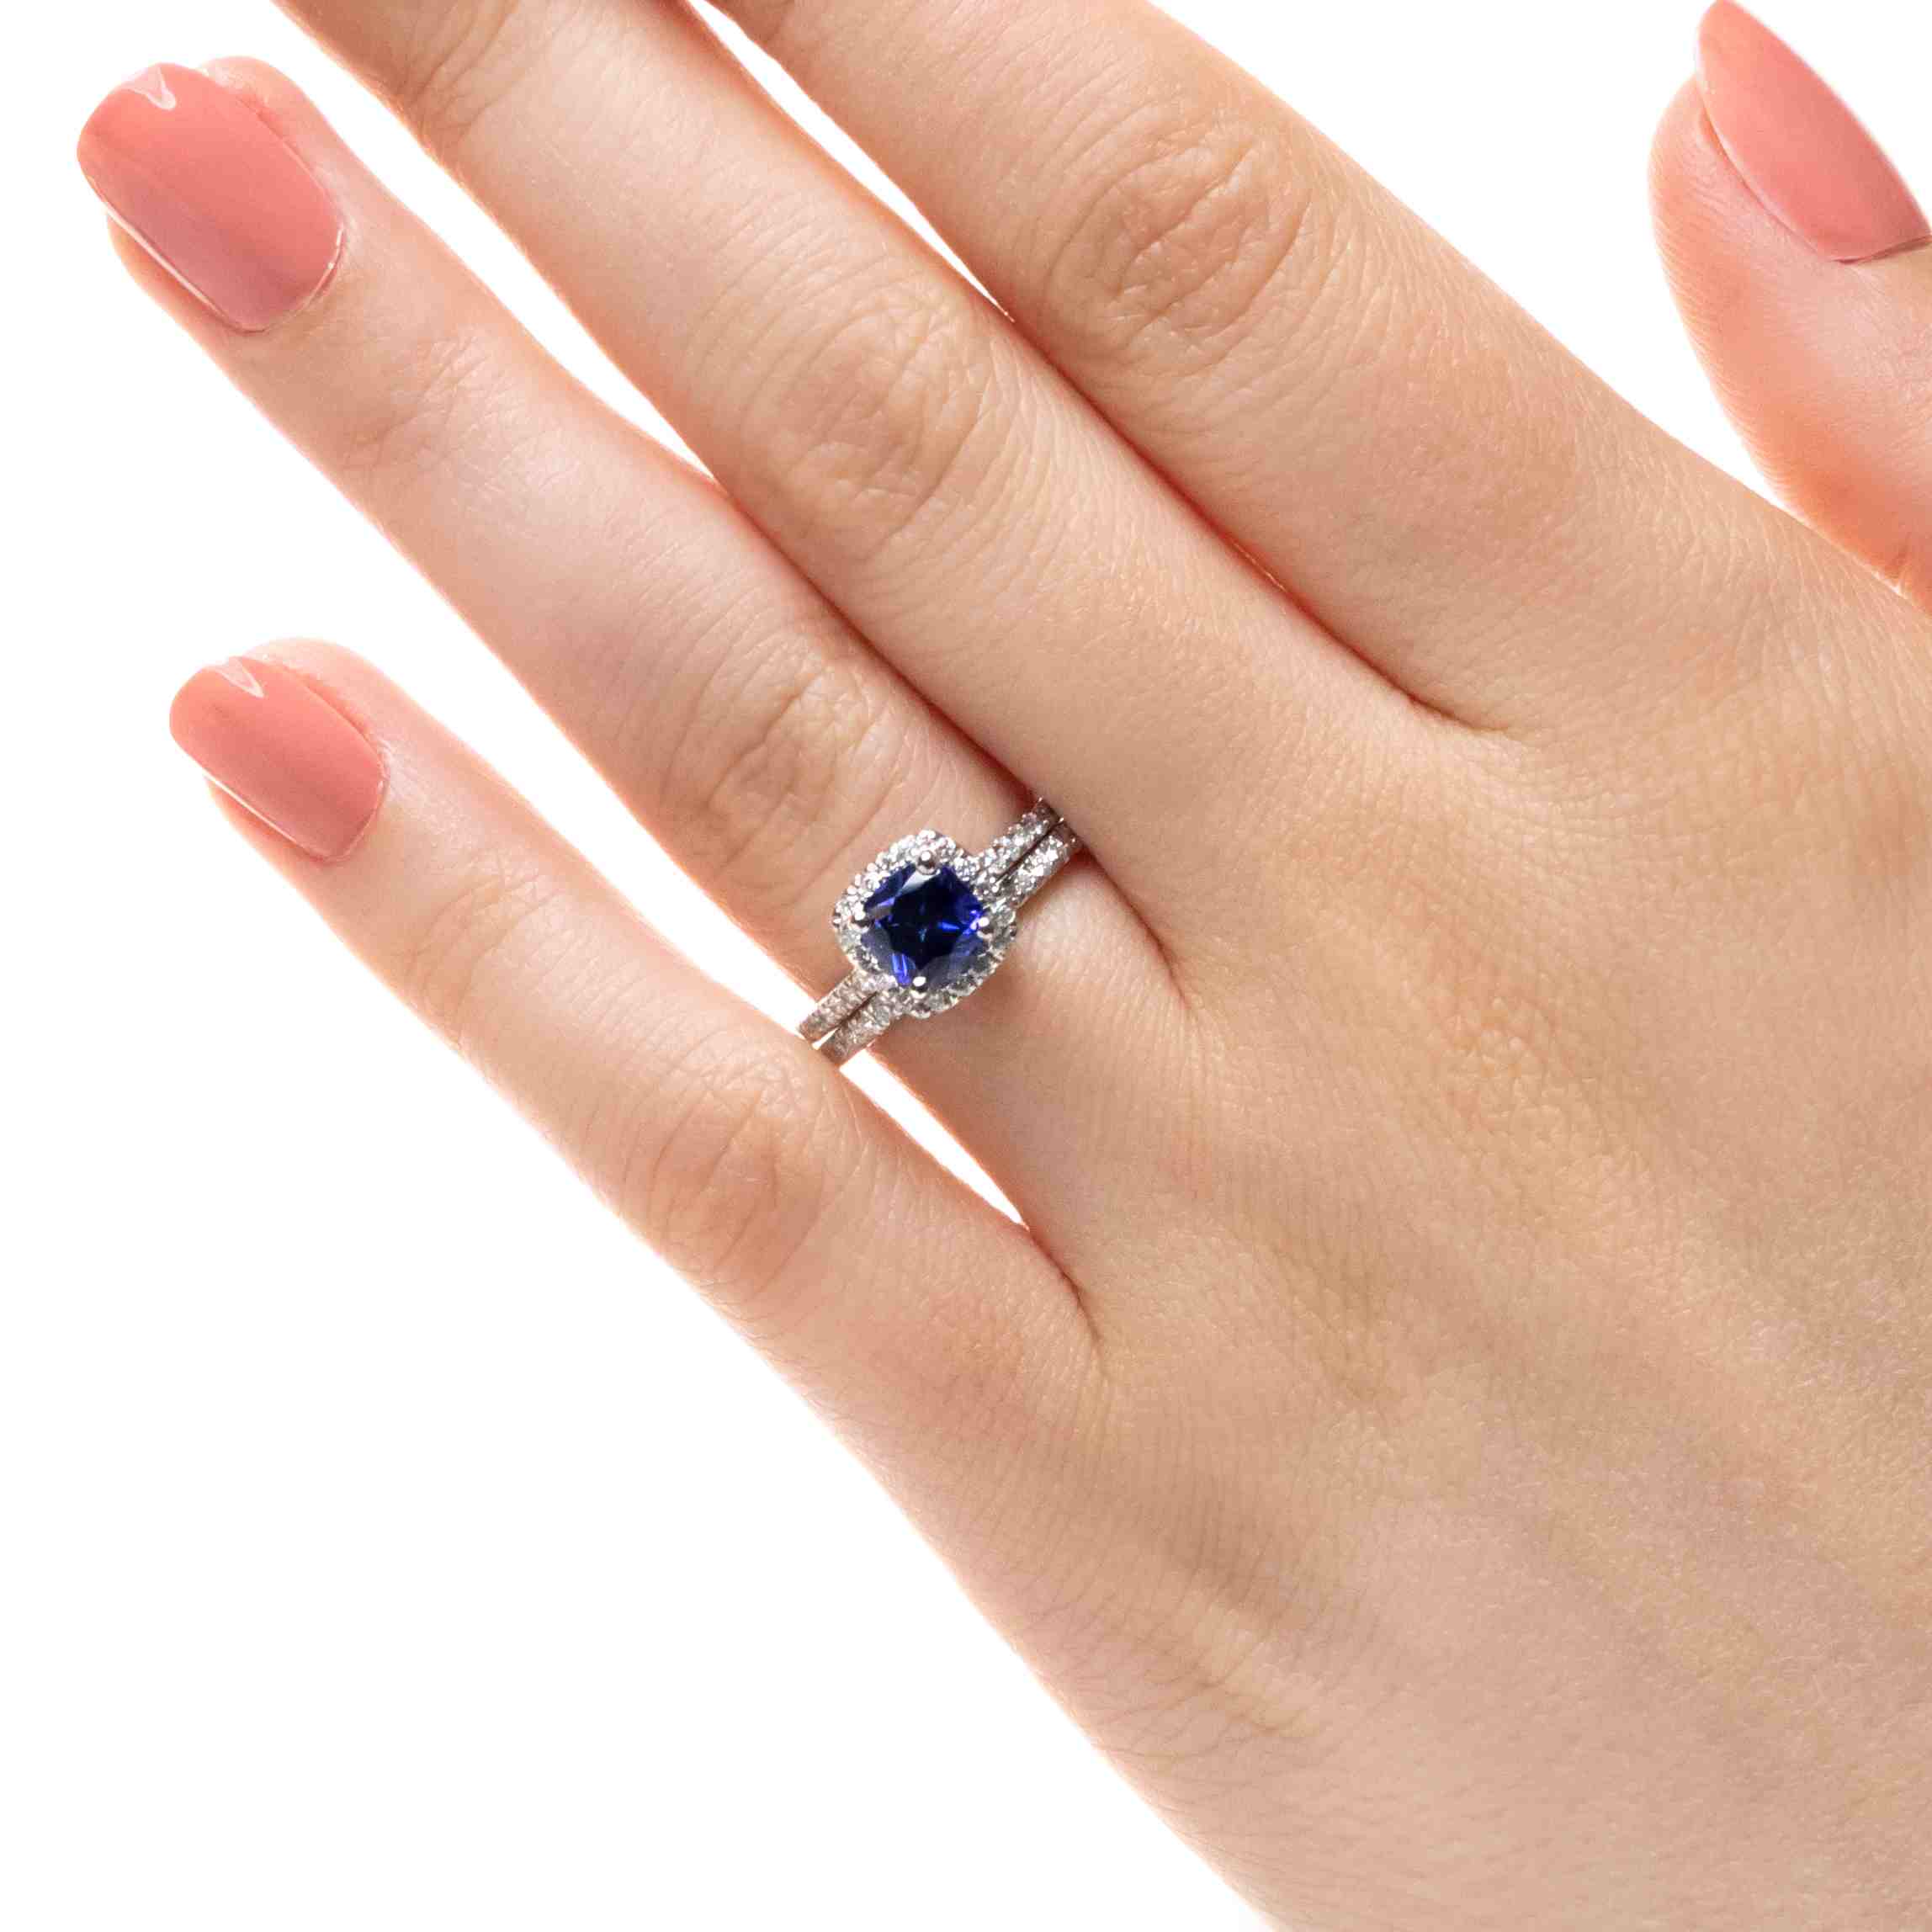 Shown with a 1.0ct Cushion cut Blue Sapphire Lab-Created Gemstone with a diamond accented halo and diamonds accenting the band in recycled 14K white gold with matching band, purchase the set for a discount 